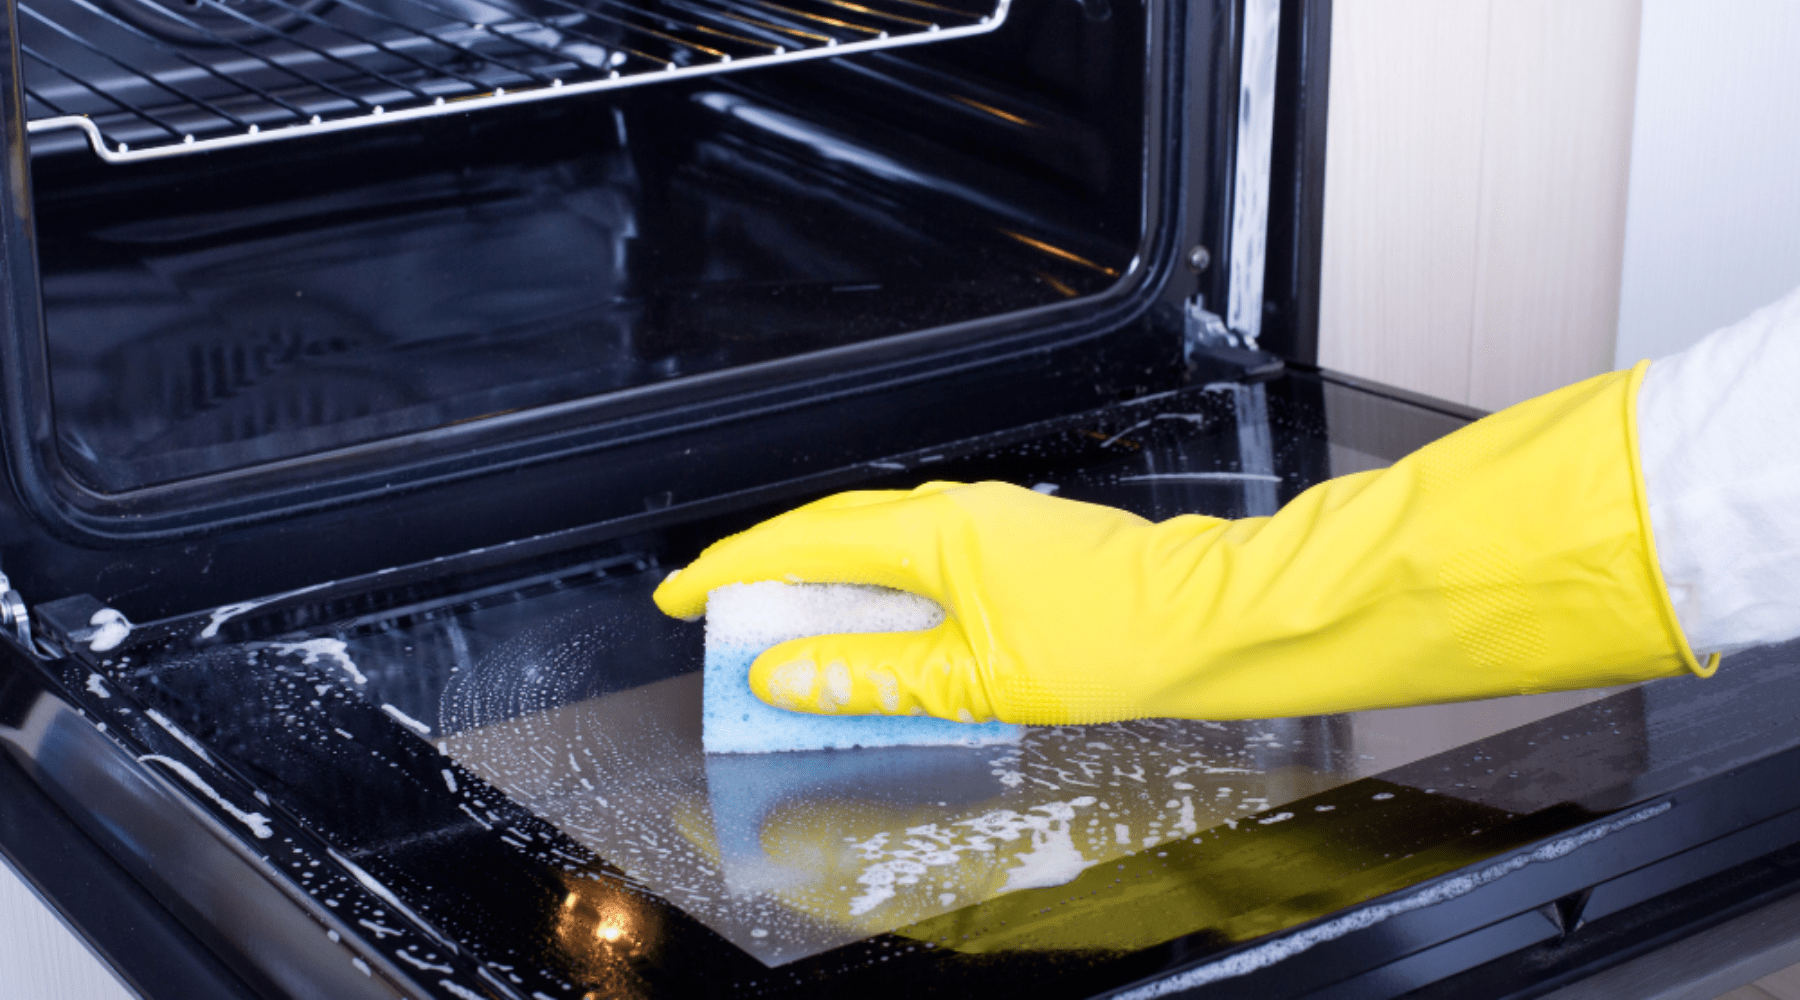 How to Clean and Care for your Kitchen Appliances